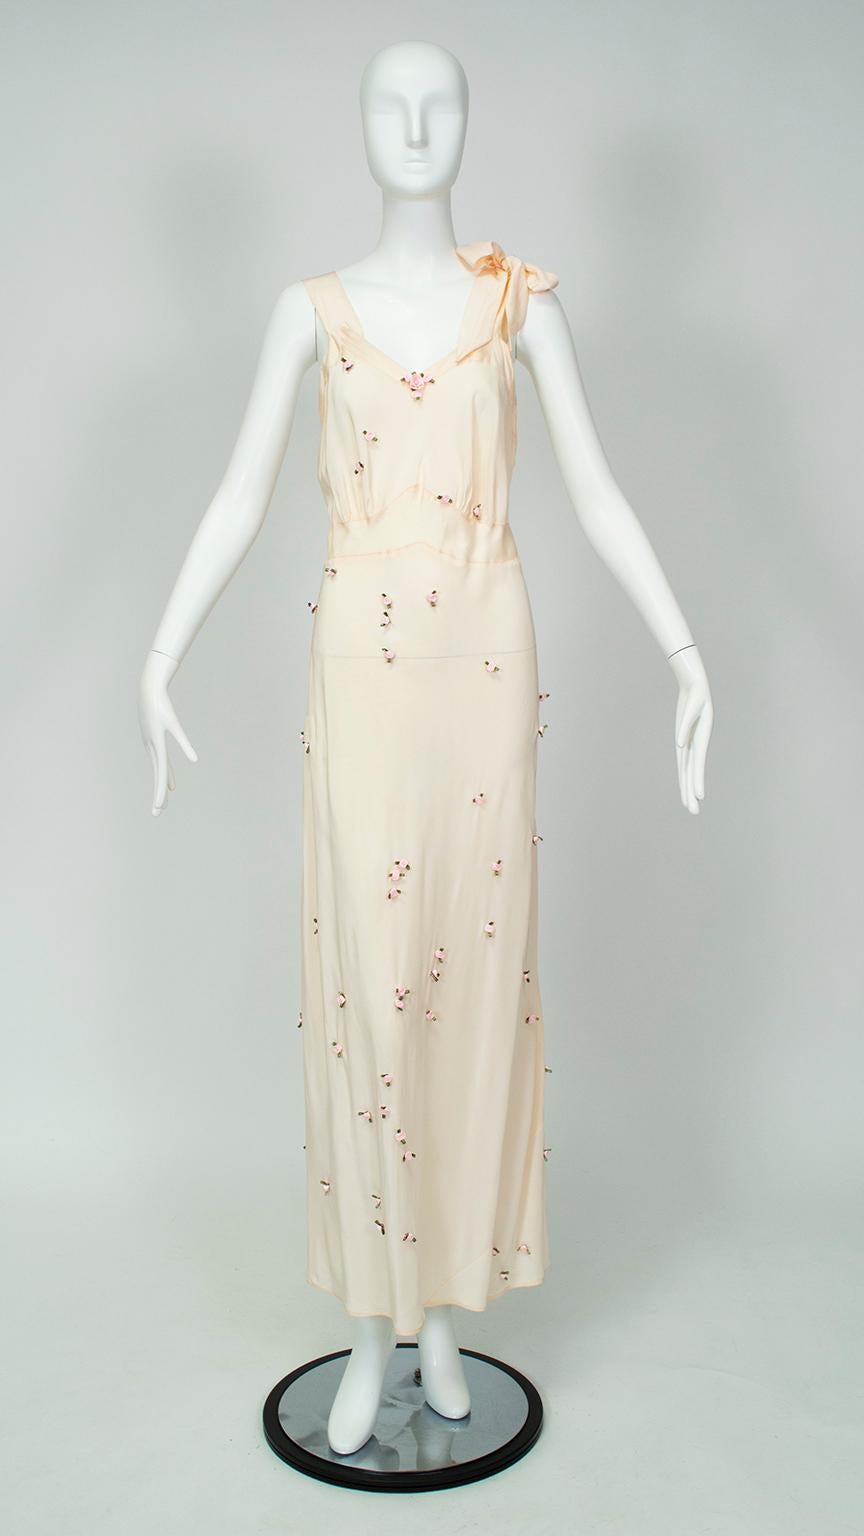 Of course, the rosebuds are the stars of this nightgown.  But don’t underestimate the shoulder tie, which almost dares to be pulled (at which point an entirely different heavenly body will appear). Perfect as an intimate gift, bridal nightgown or